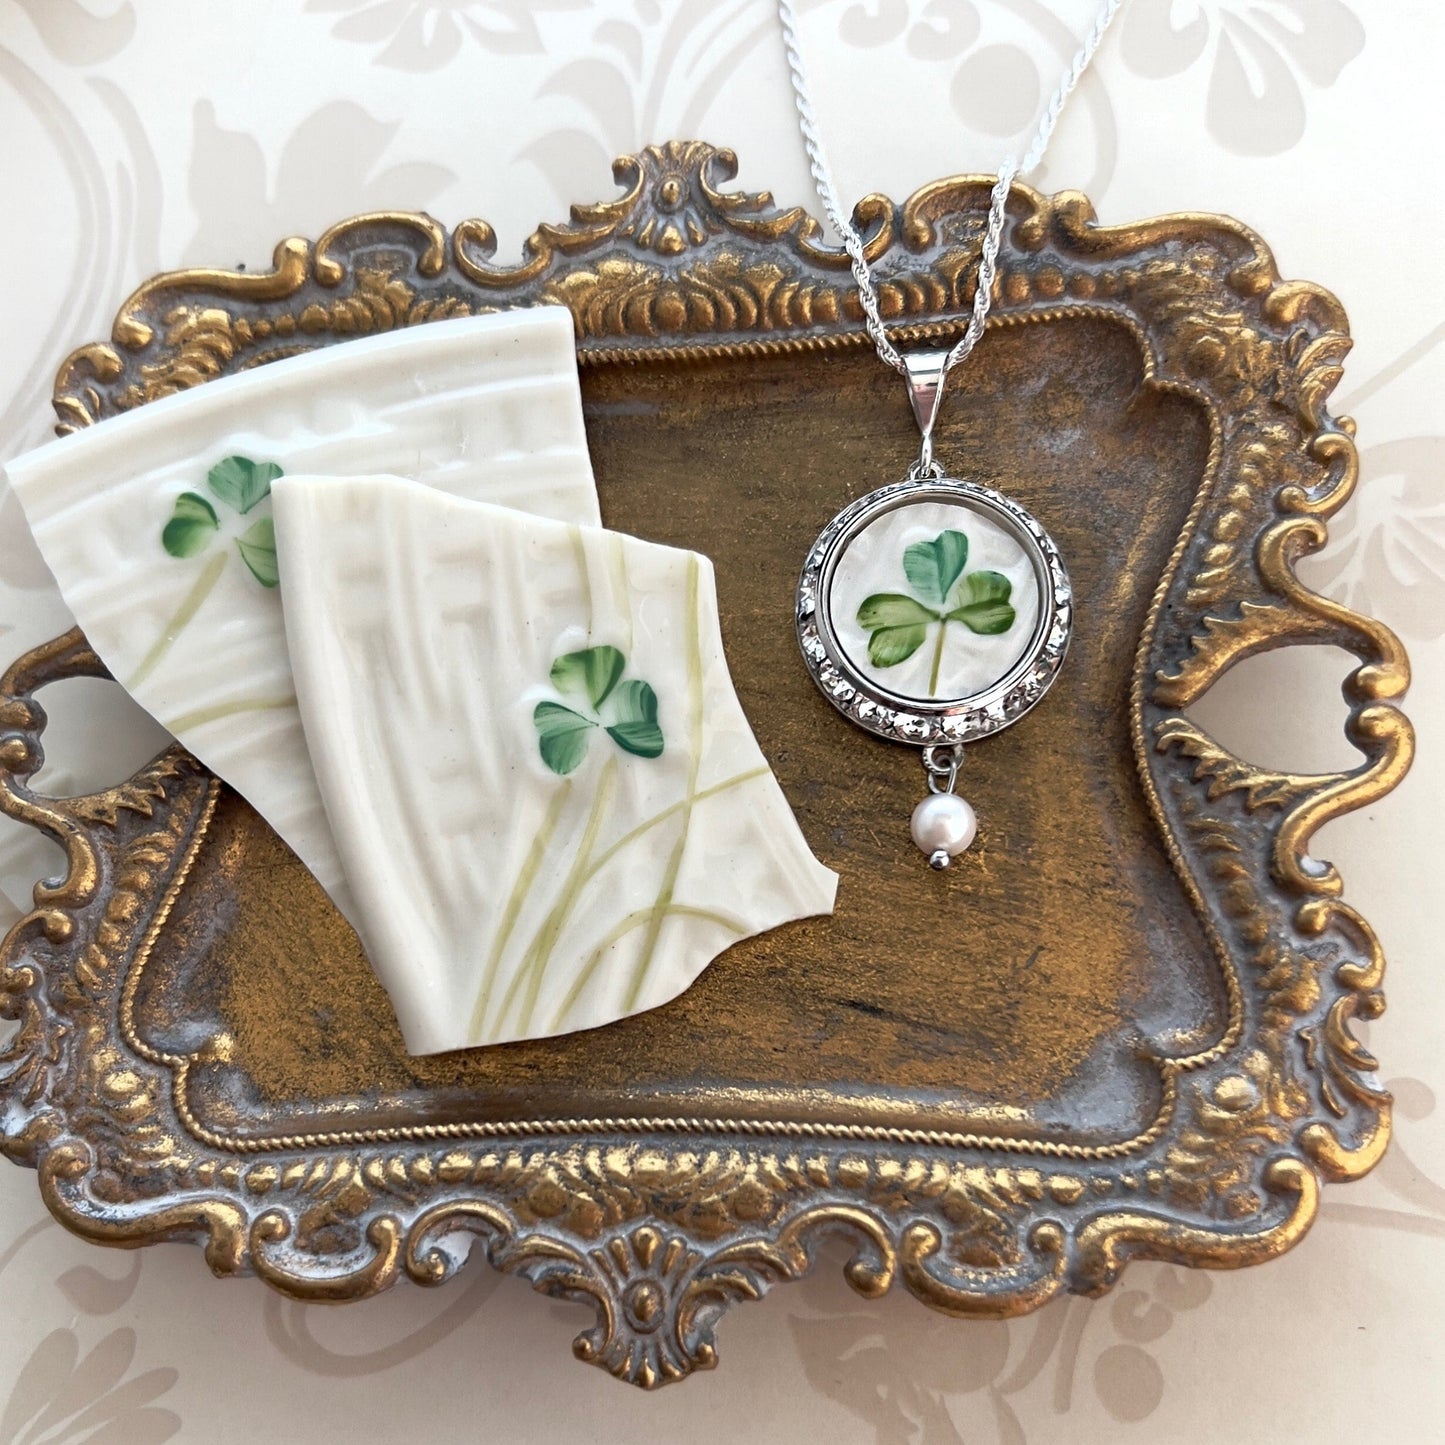 Celtic Necklace, Irish Belleek Broken China Jewelry, 20th Anniversary Gift for Wife, Unique Crystal Gifts for Women